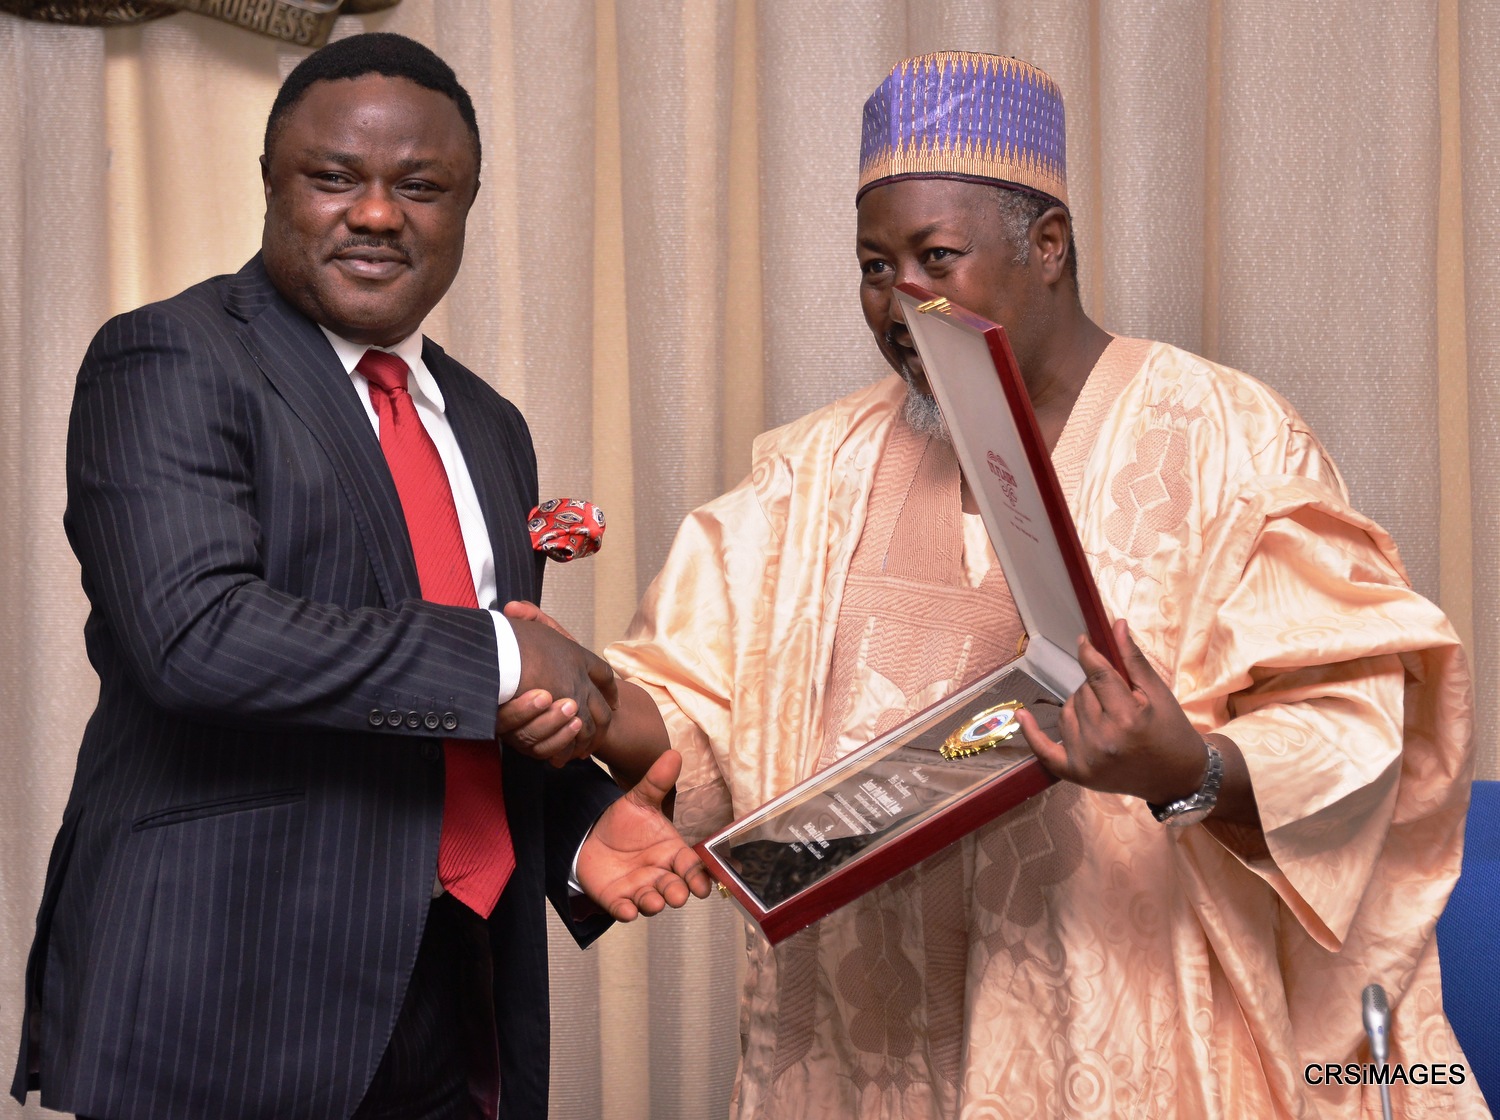 Cross River State Governor, Senator Ben Ayade being presented with a plague by Alhaji Muhammed B. Abubakar, Governor of Jigawa State and immediate past National President of Nigerian Association of Chambers of Commerce, Industry, Mines and Agriculture (NACCIMA) during a courtesy call in Government House Calabar, today